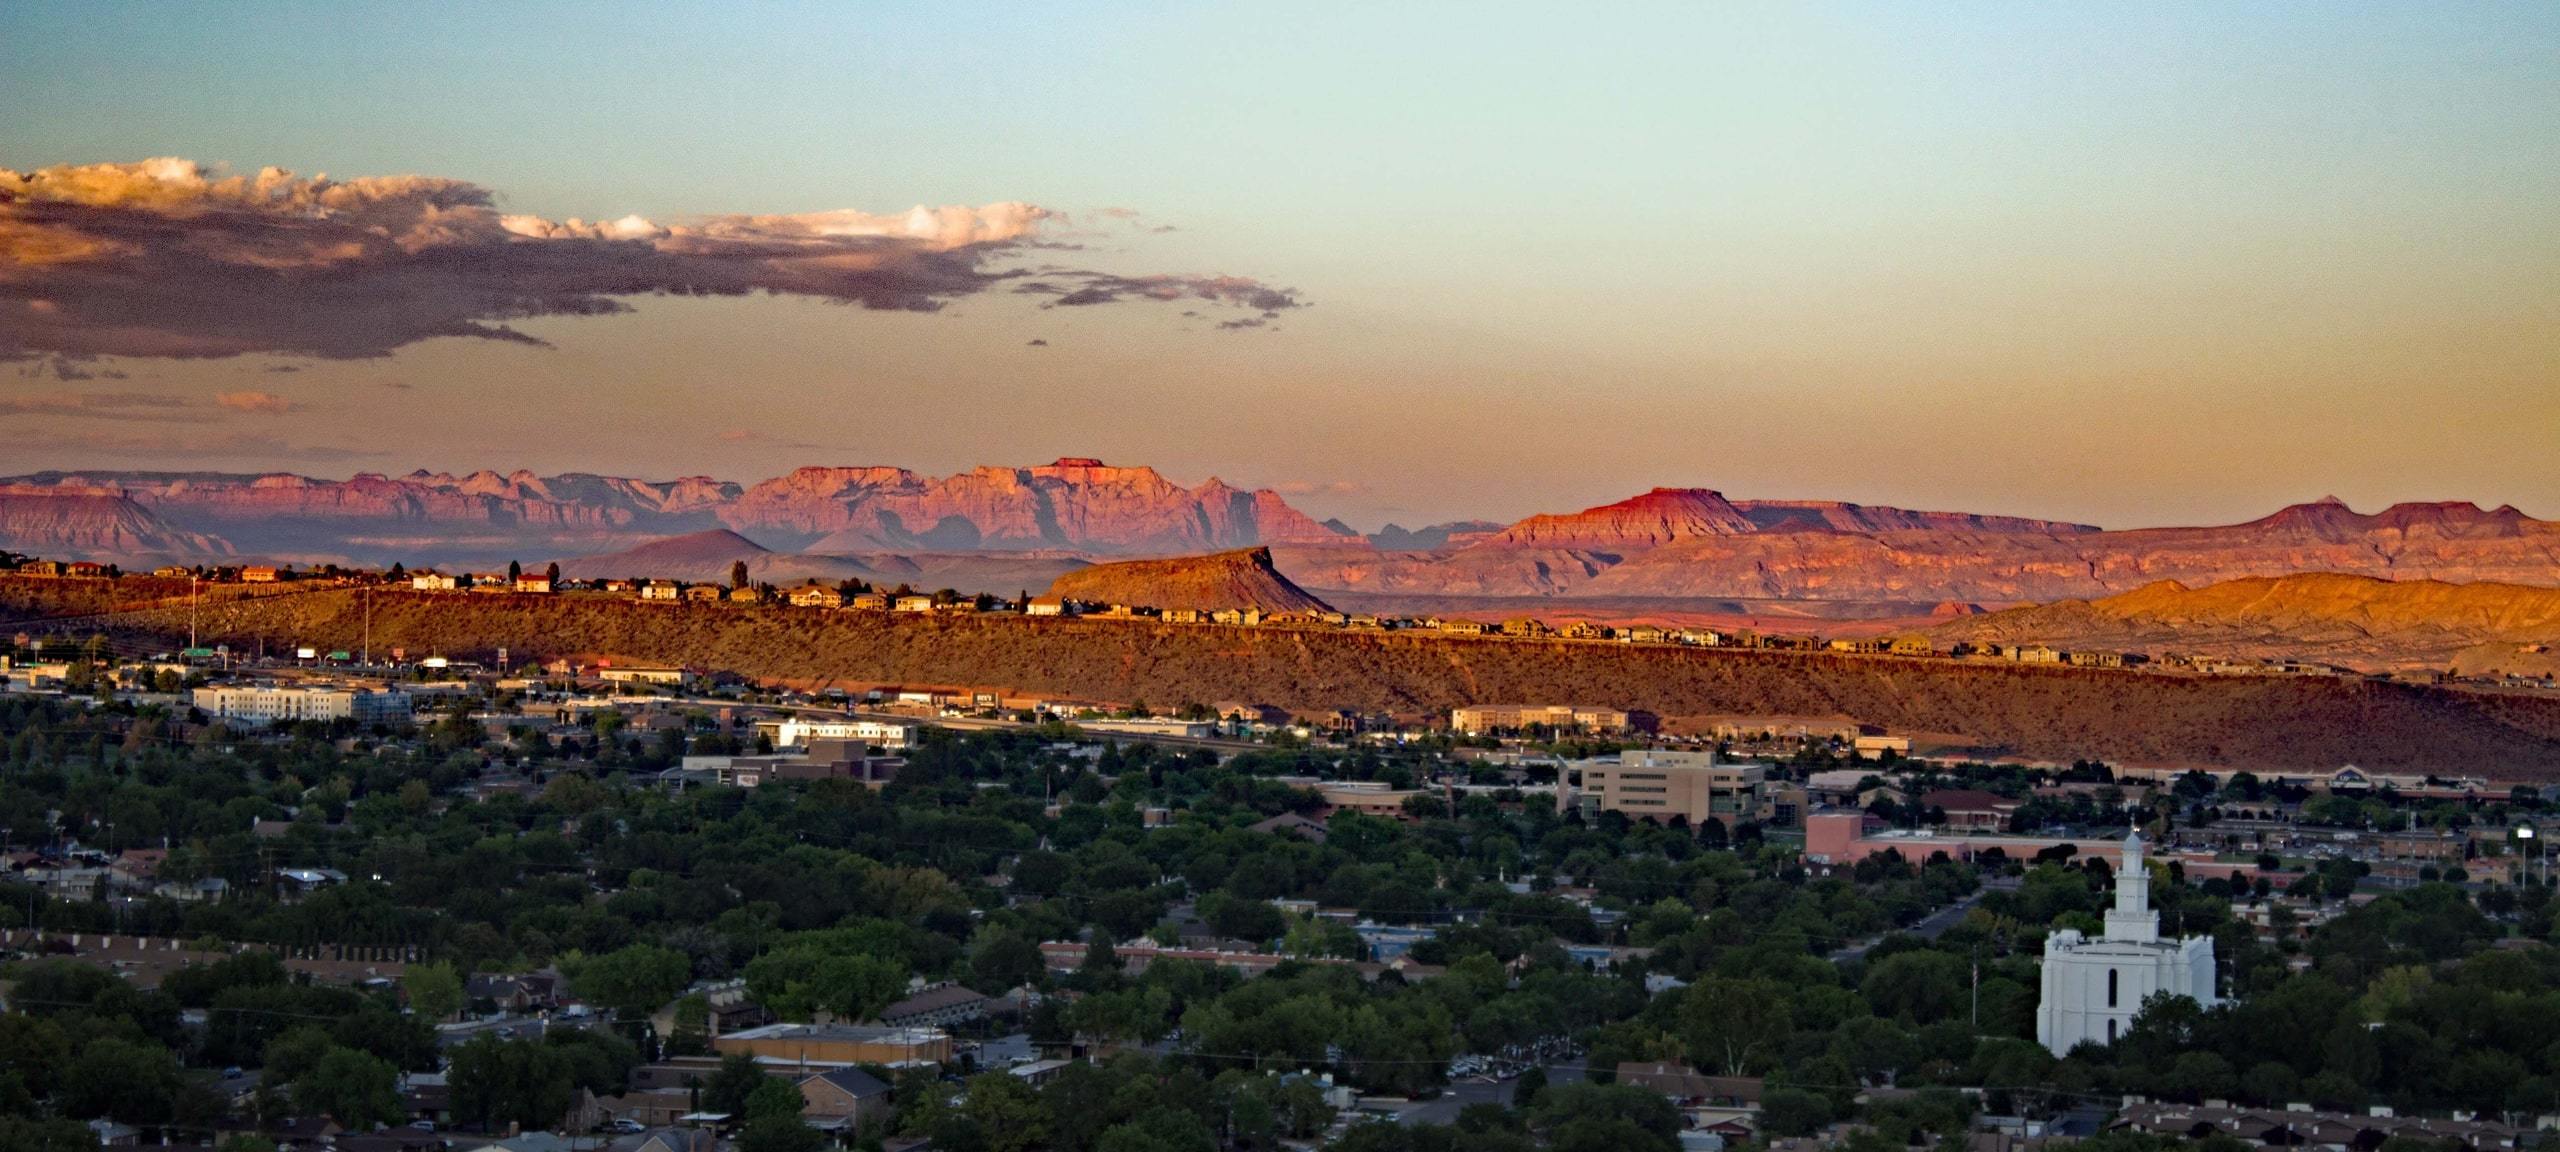 Sunset over the city of St. George, Utah